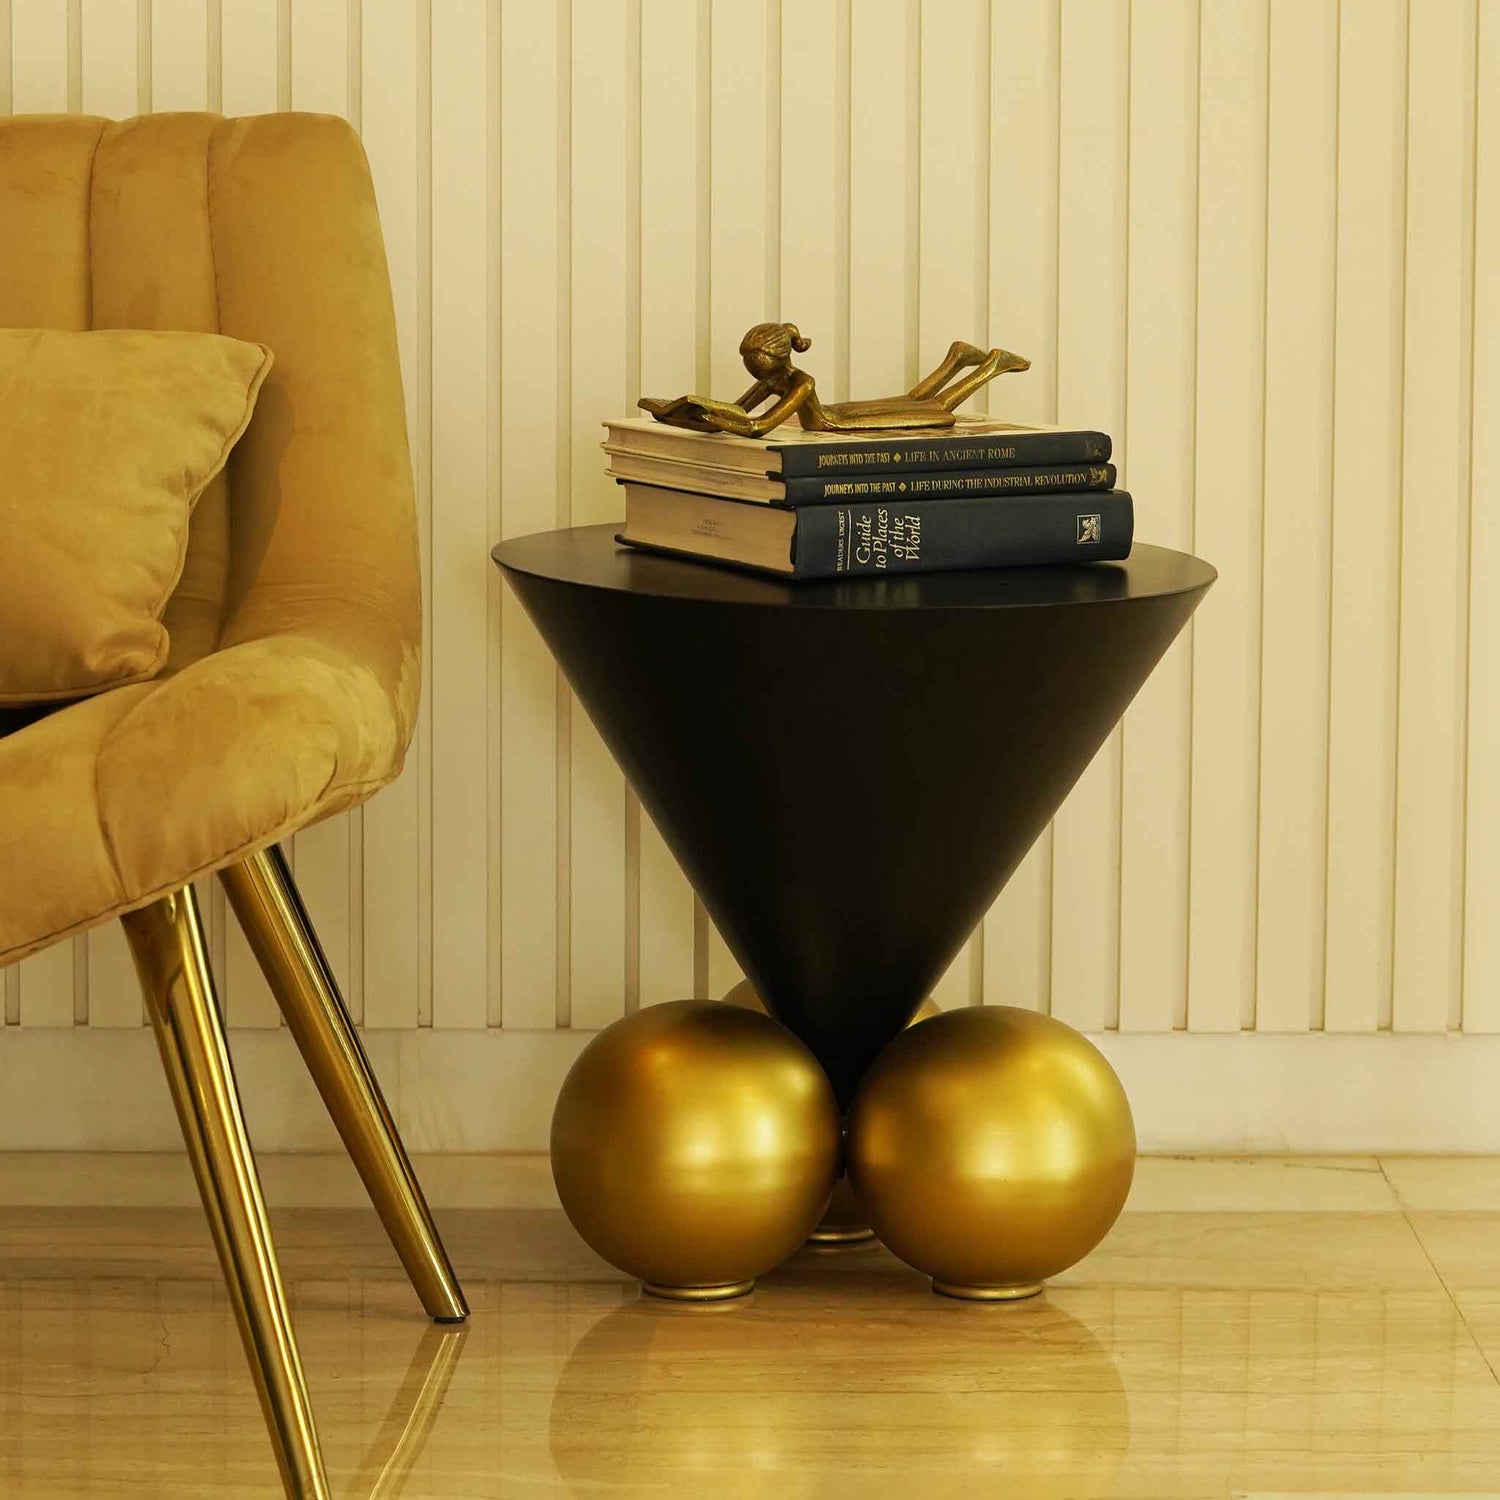 Modern design black inverted cone table with 3 spherical golden balls on the base. placed next to a chair.